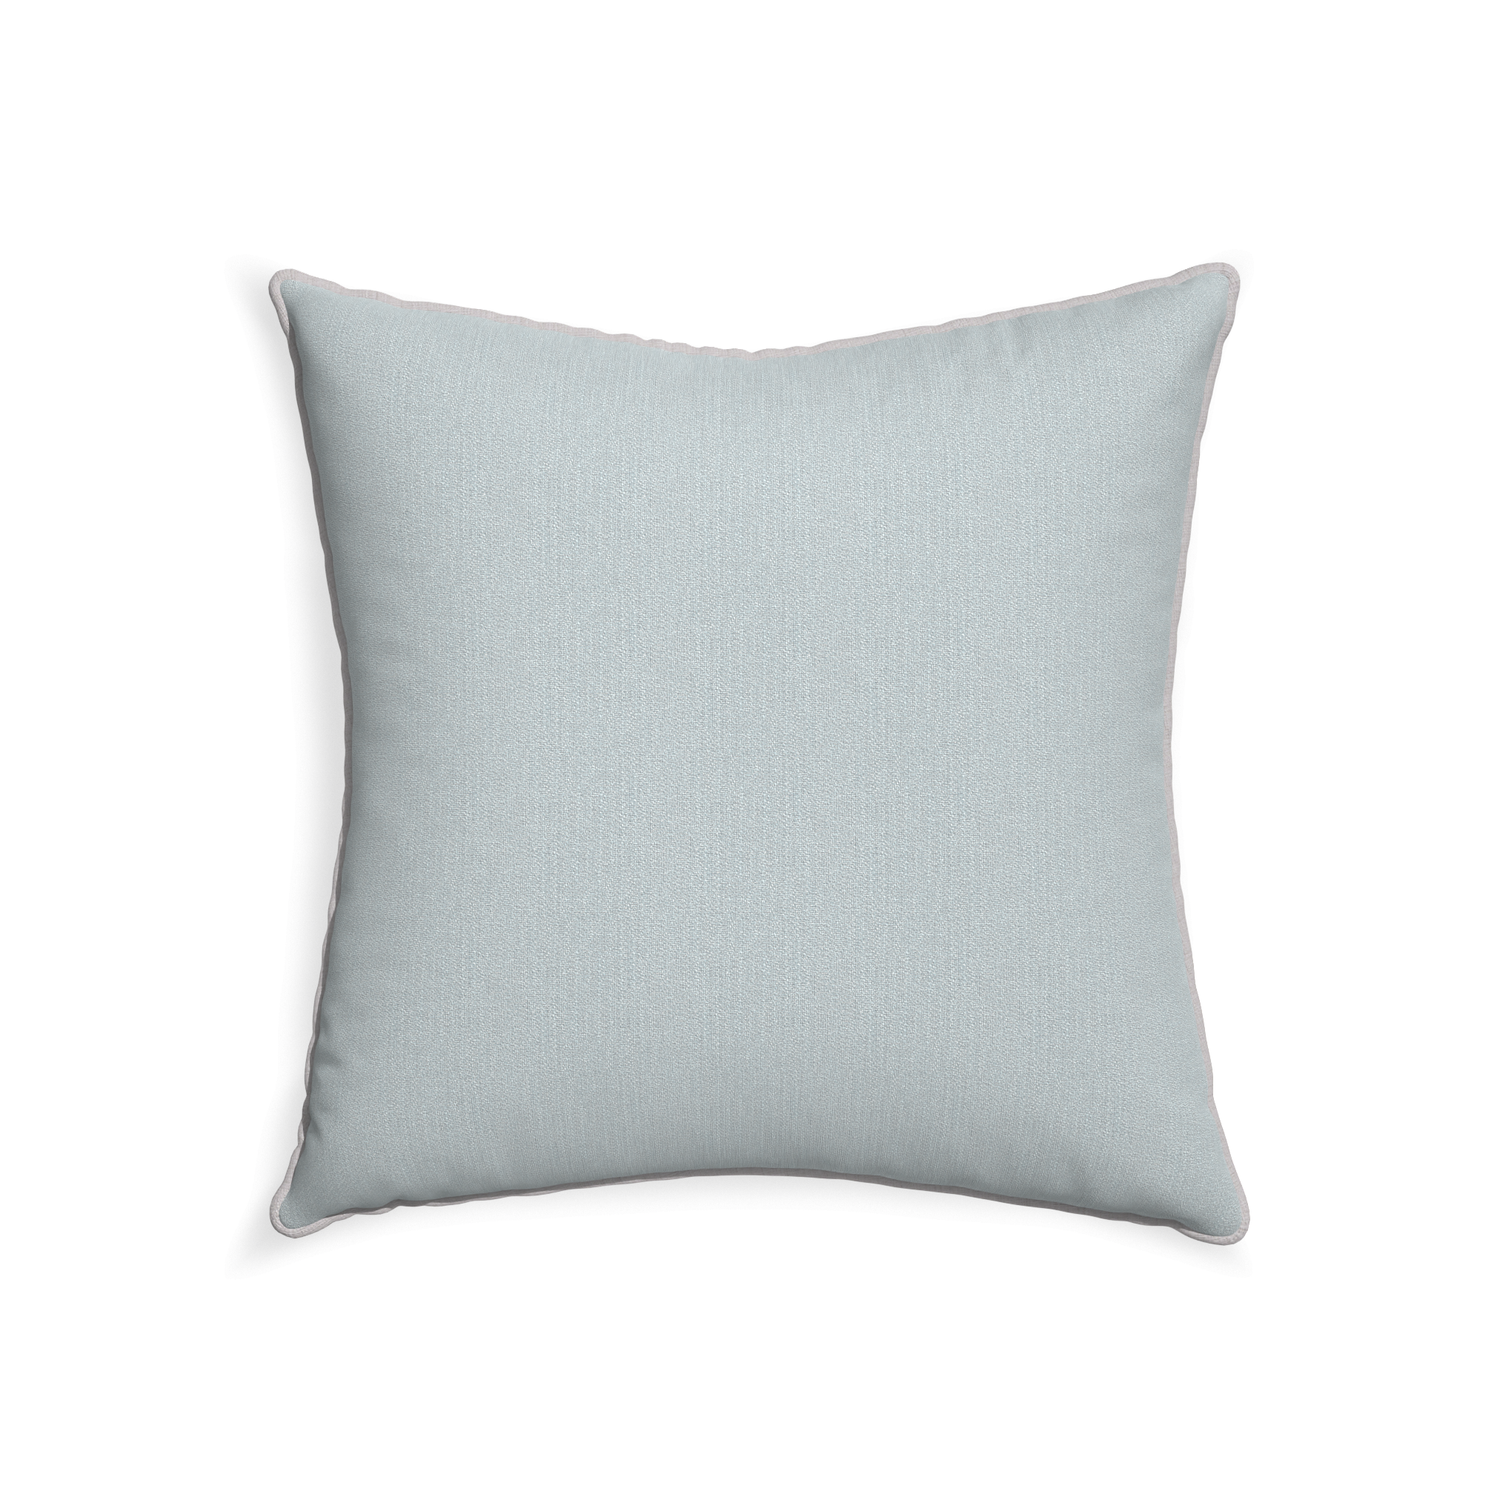 22-square sea custom grey bluepillow with pebble piping on white background